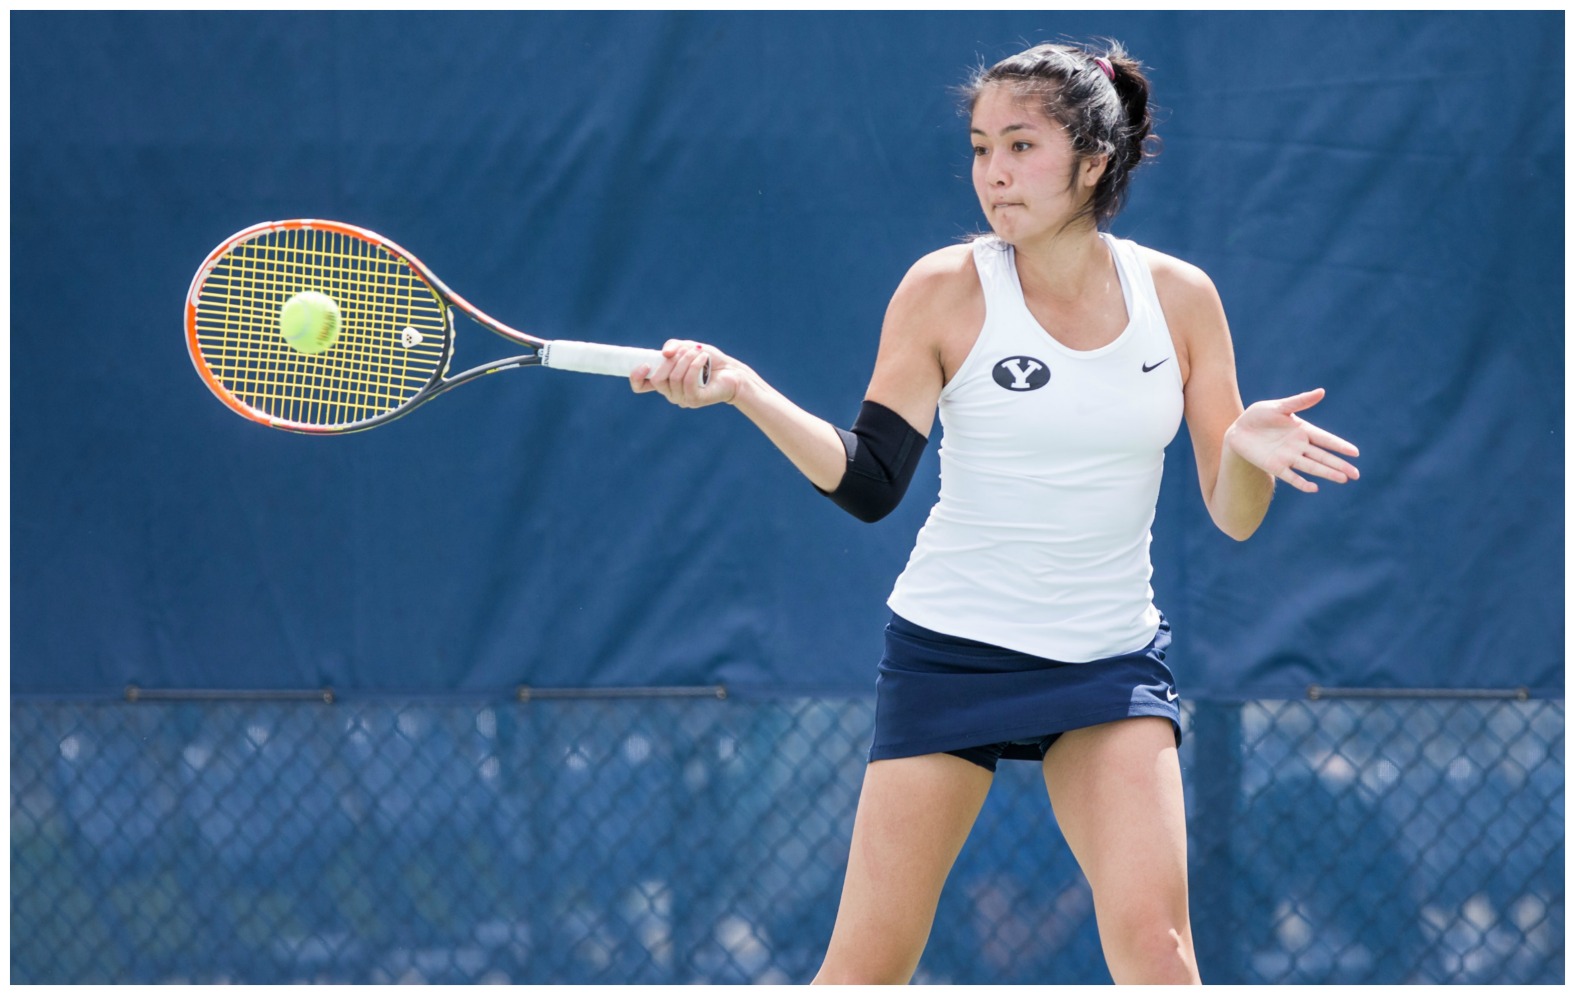 Becoming a mormon: playing on the BYU tennis team